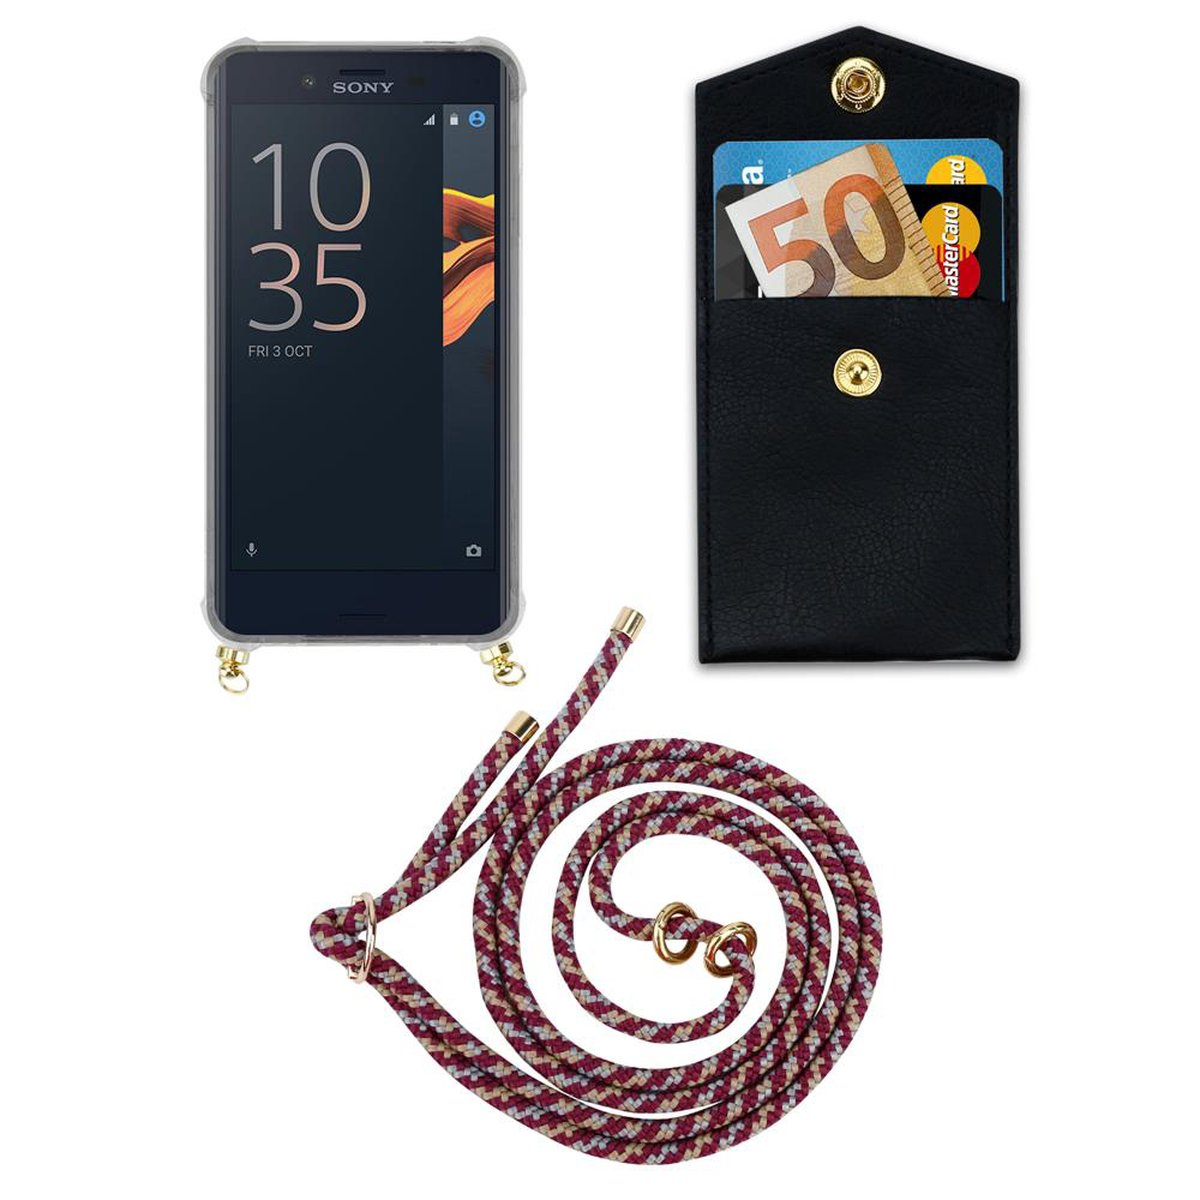 CADORABO Handy Kette Xperia mit Sony, GELB Band Hülle, Kordel Ringen, WEIß X ROT und COMPACT, Gold Backcover, abnehmbarer